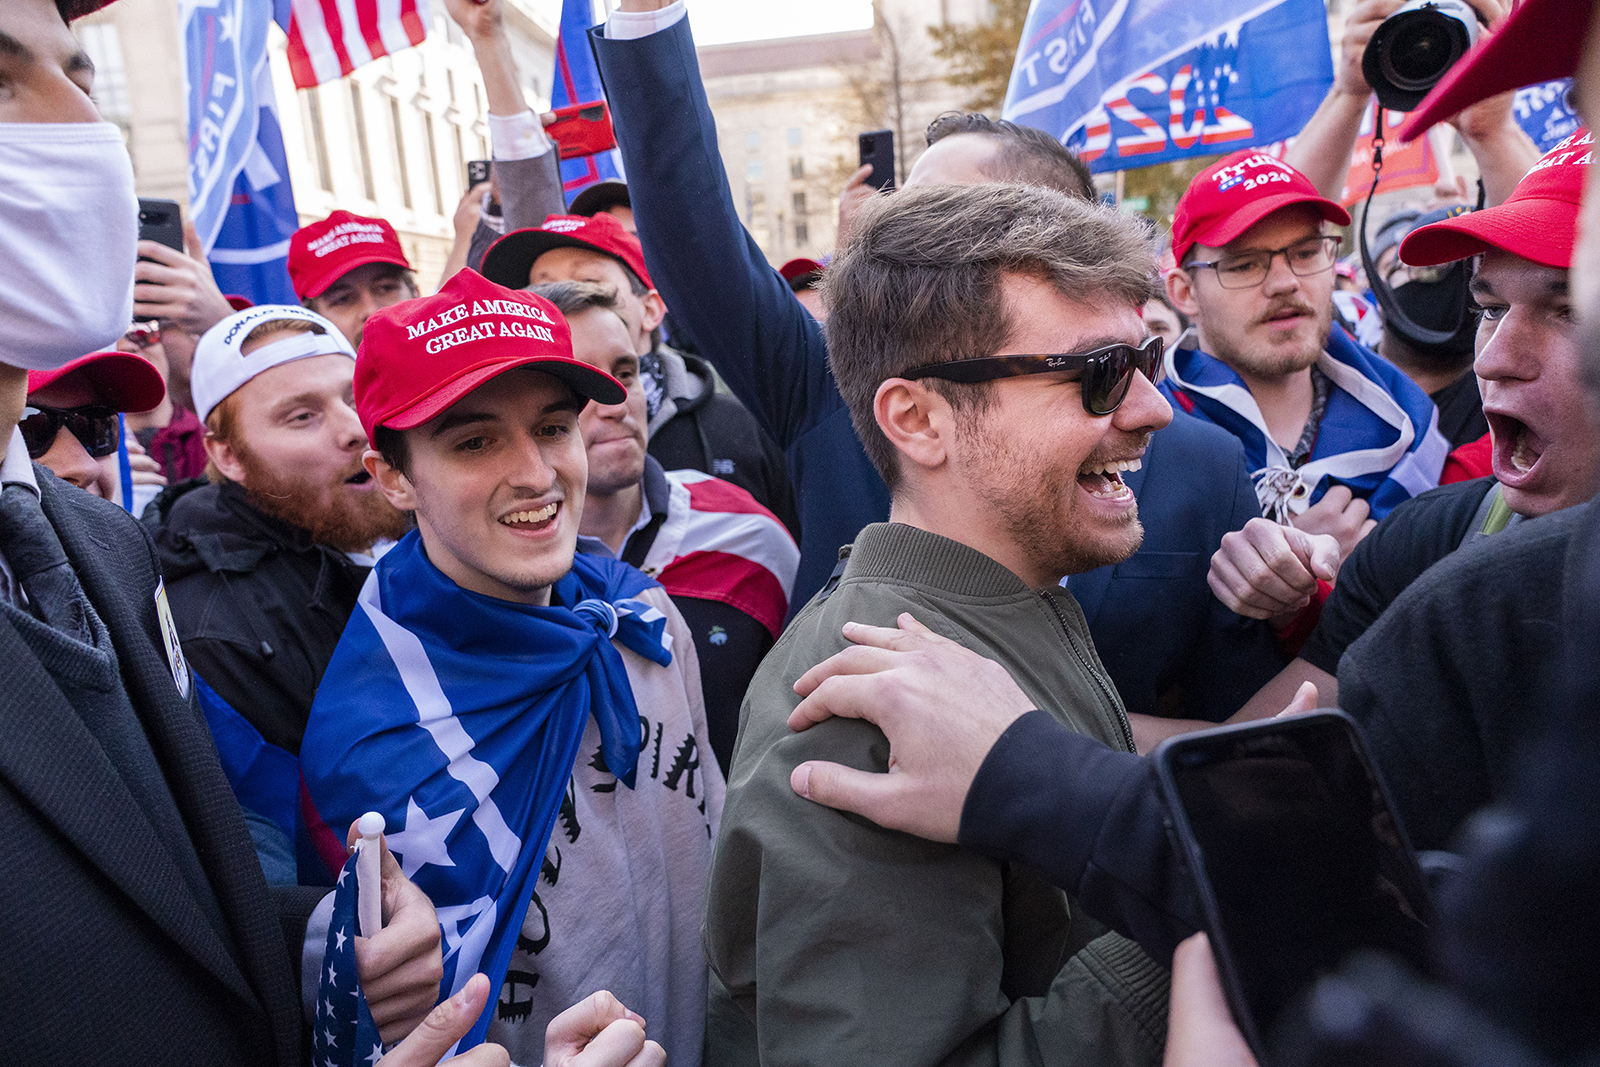 FILE - Nick Fuentes right-wing podcaster, center right in sunglasses, greets supporters before speaking at a pro-Trump march, Nov. 14, 2020, in Washington. Former President Donald Trump had dinner, Nov. 22, 2022, at his Mar-a-Lago club with the rapper formerly known as Kanye West, who is now known as Ye, as well as Nick Fuentes, who has used his online platform to spew antisemitic and white supremacist rhetoric.(AP Photo/Jacquelyn Martin, File)